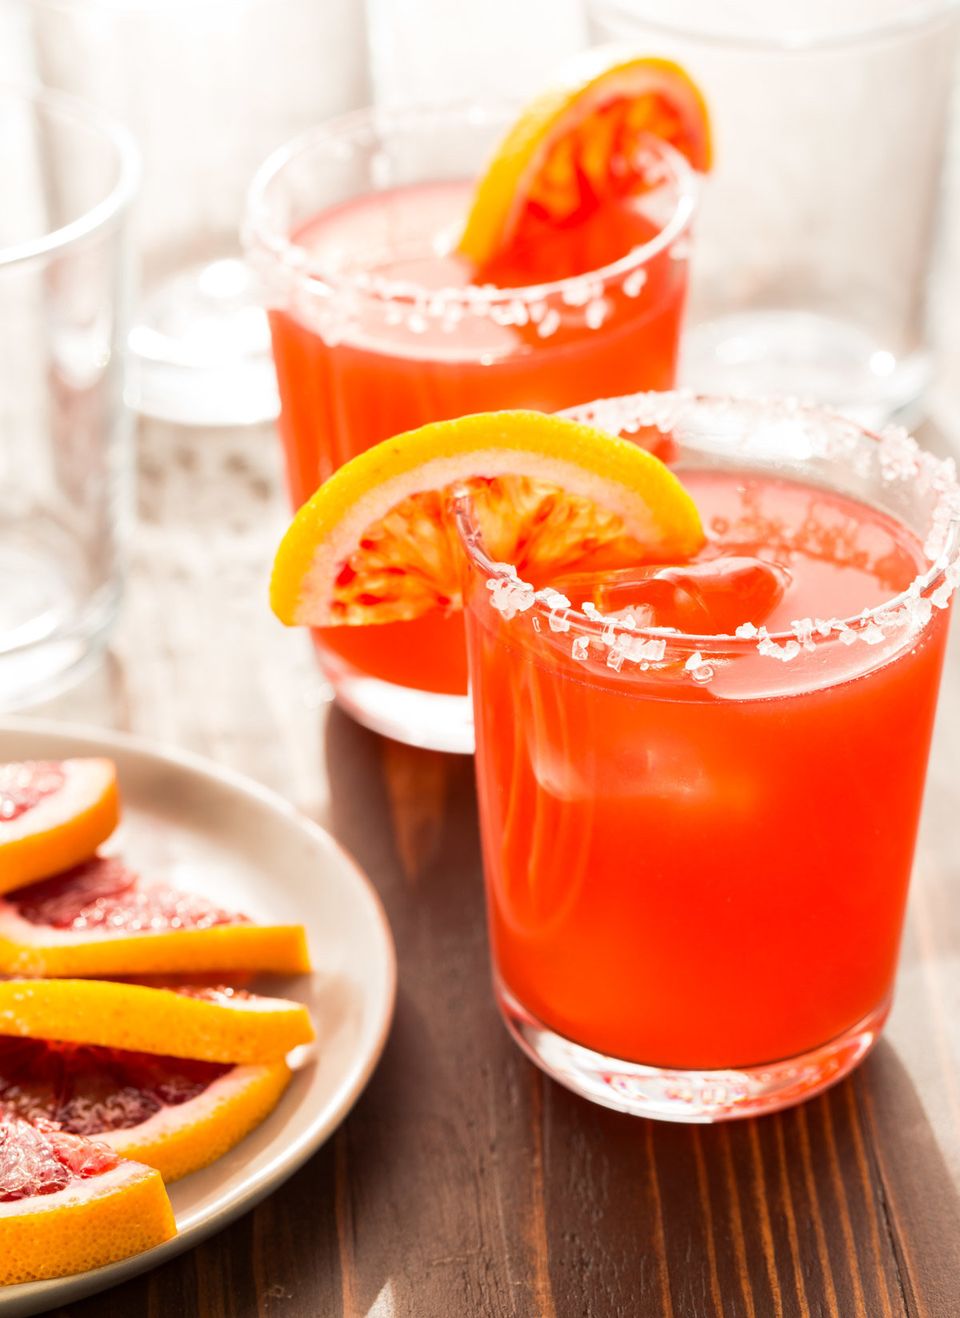 13 Best Big Batched Cocktails to Make at Your Super Bowl Party